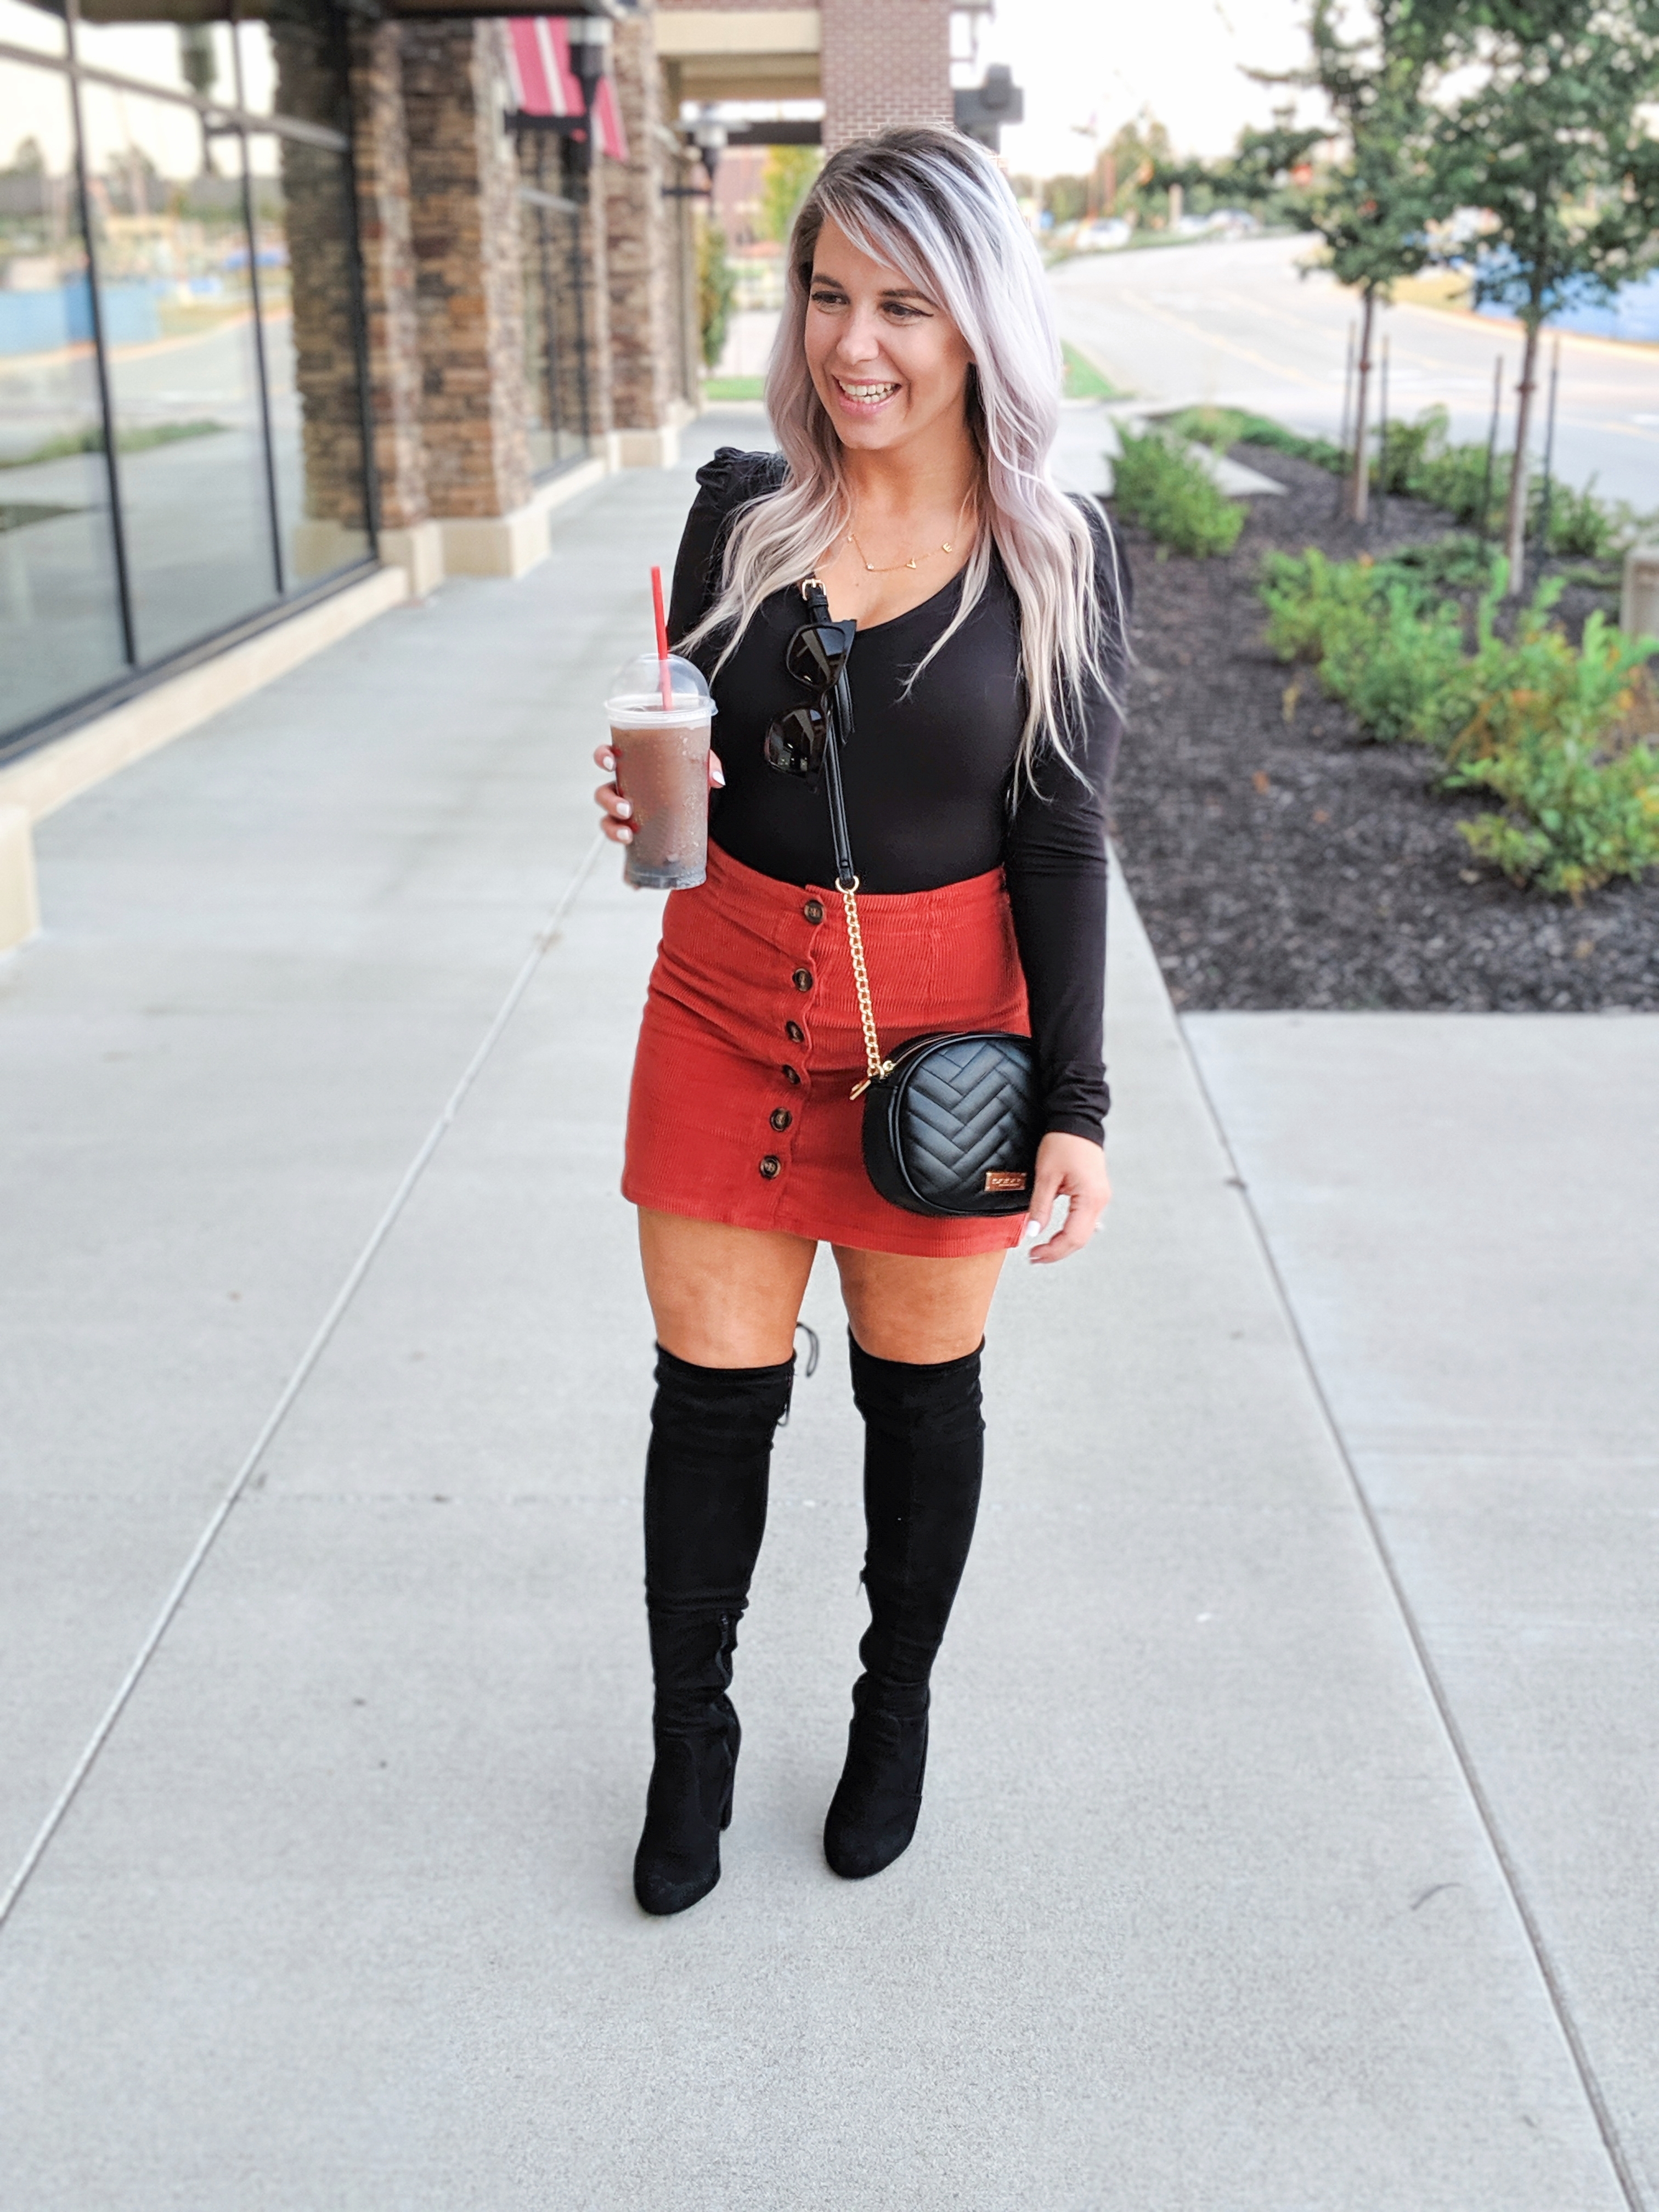 Corduroy Skirt Outfits - Fall Outfits 2019: (ad) Scored this black bodysuit, corduroy skirt, and crossbody bag at Gordmans during their Grand Opening Tour! I shopped the Gordmans in Dyersburg, TN and let me tell you, their prices are too good to pass up! Loving this cute button up corduroy skirt for fall 2019! #GotitatGordmans #GordmansGrandOpeningTour #gthanks 